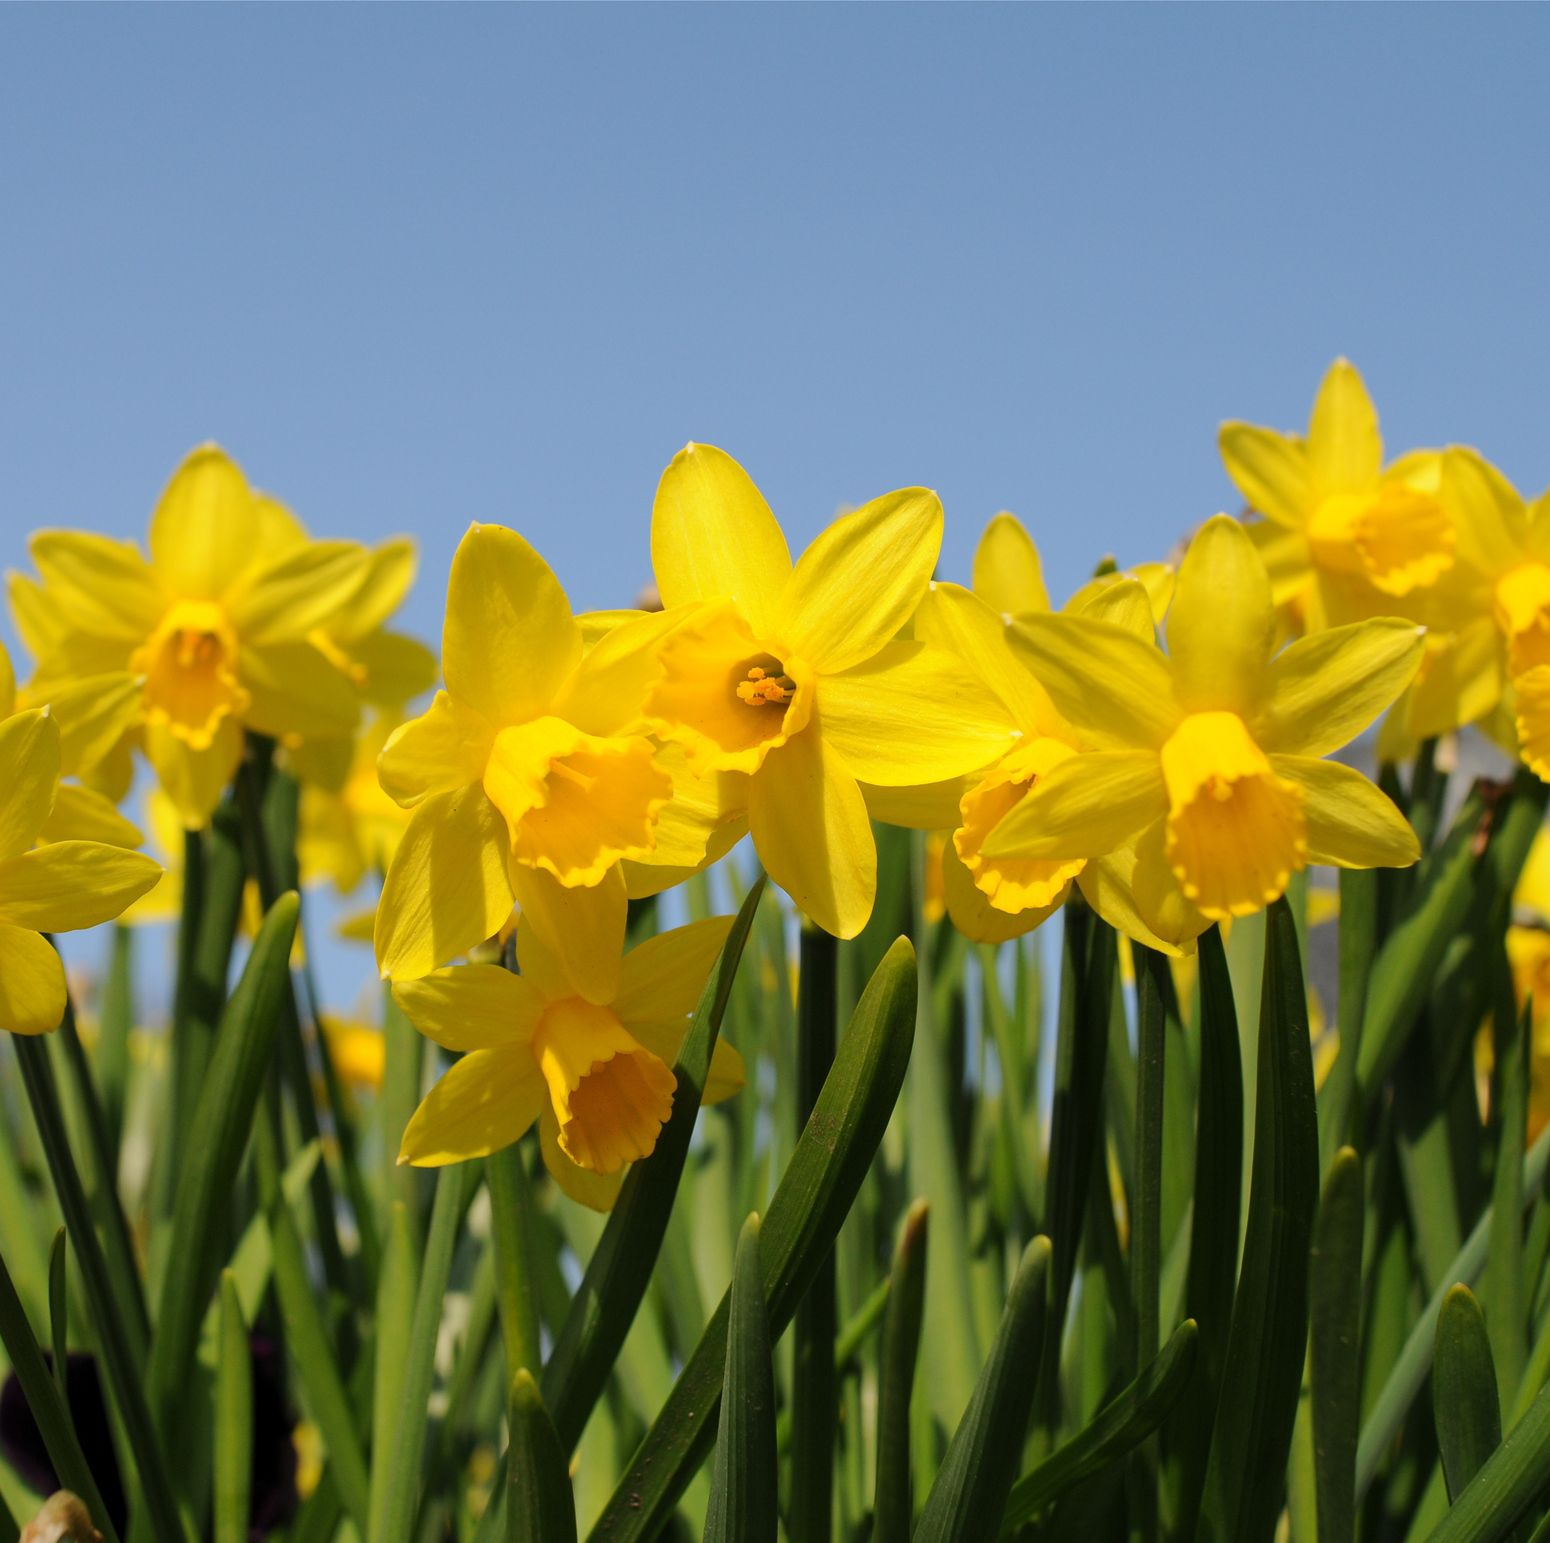 Daffodil shortage because of the mild weather means we might not have any by Easter